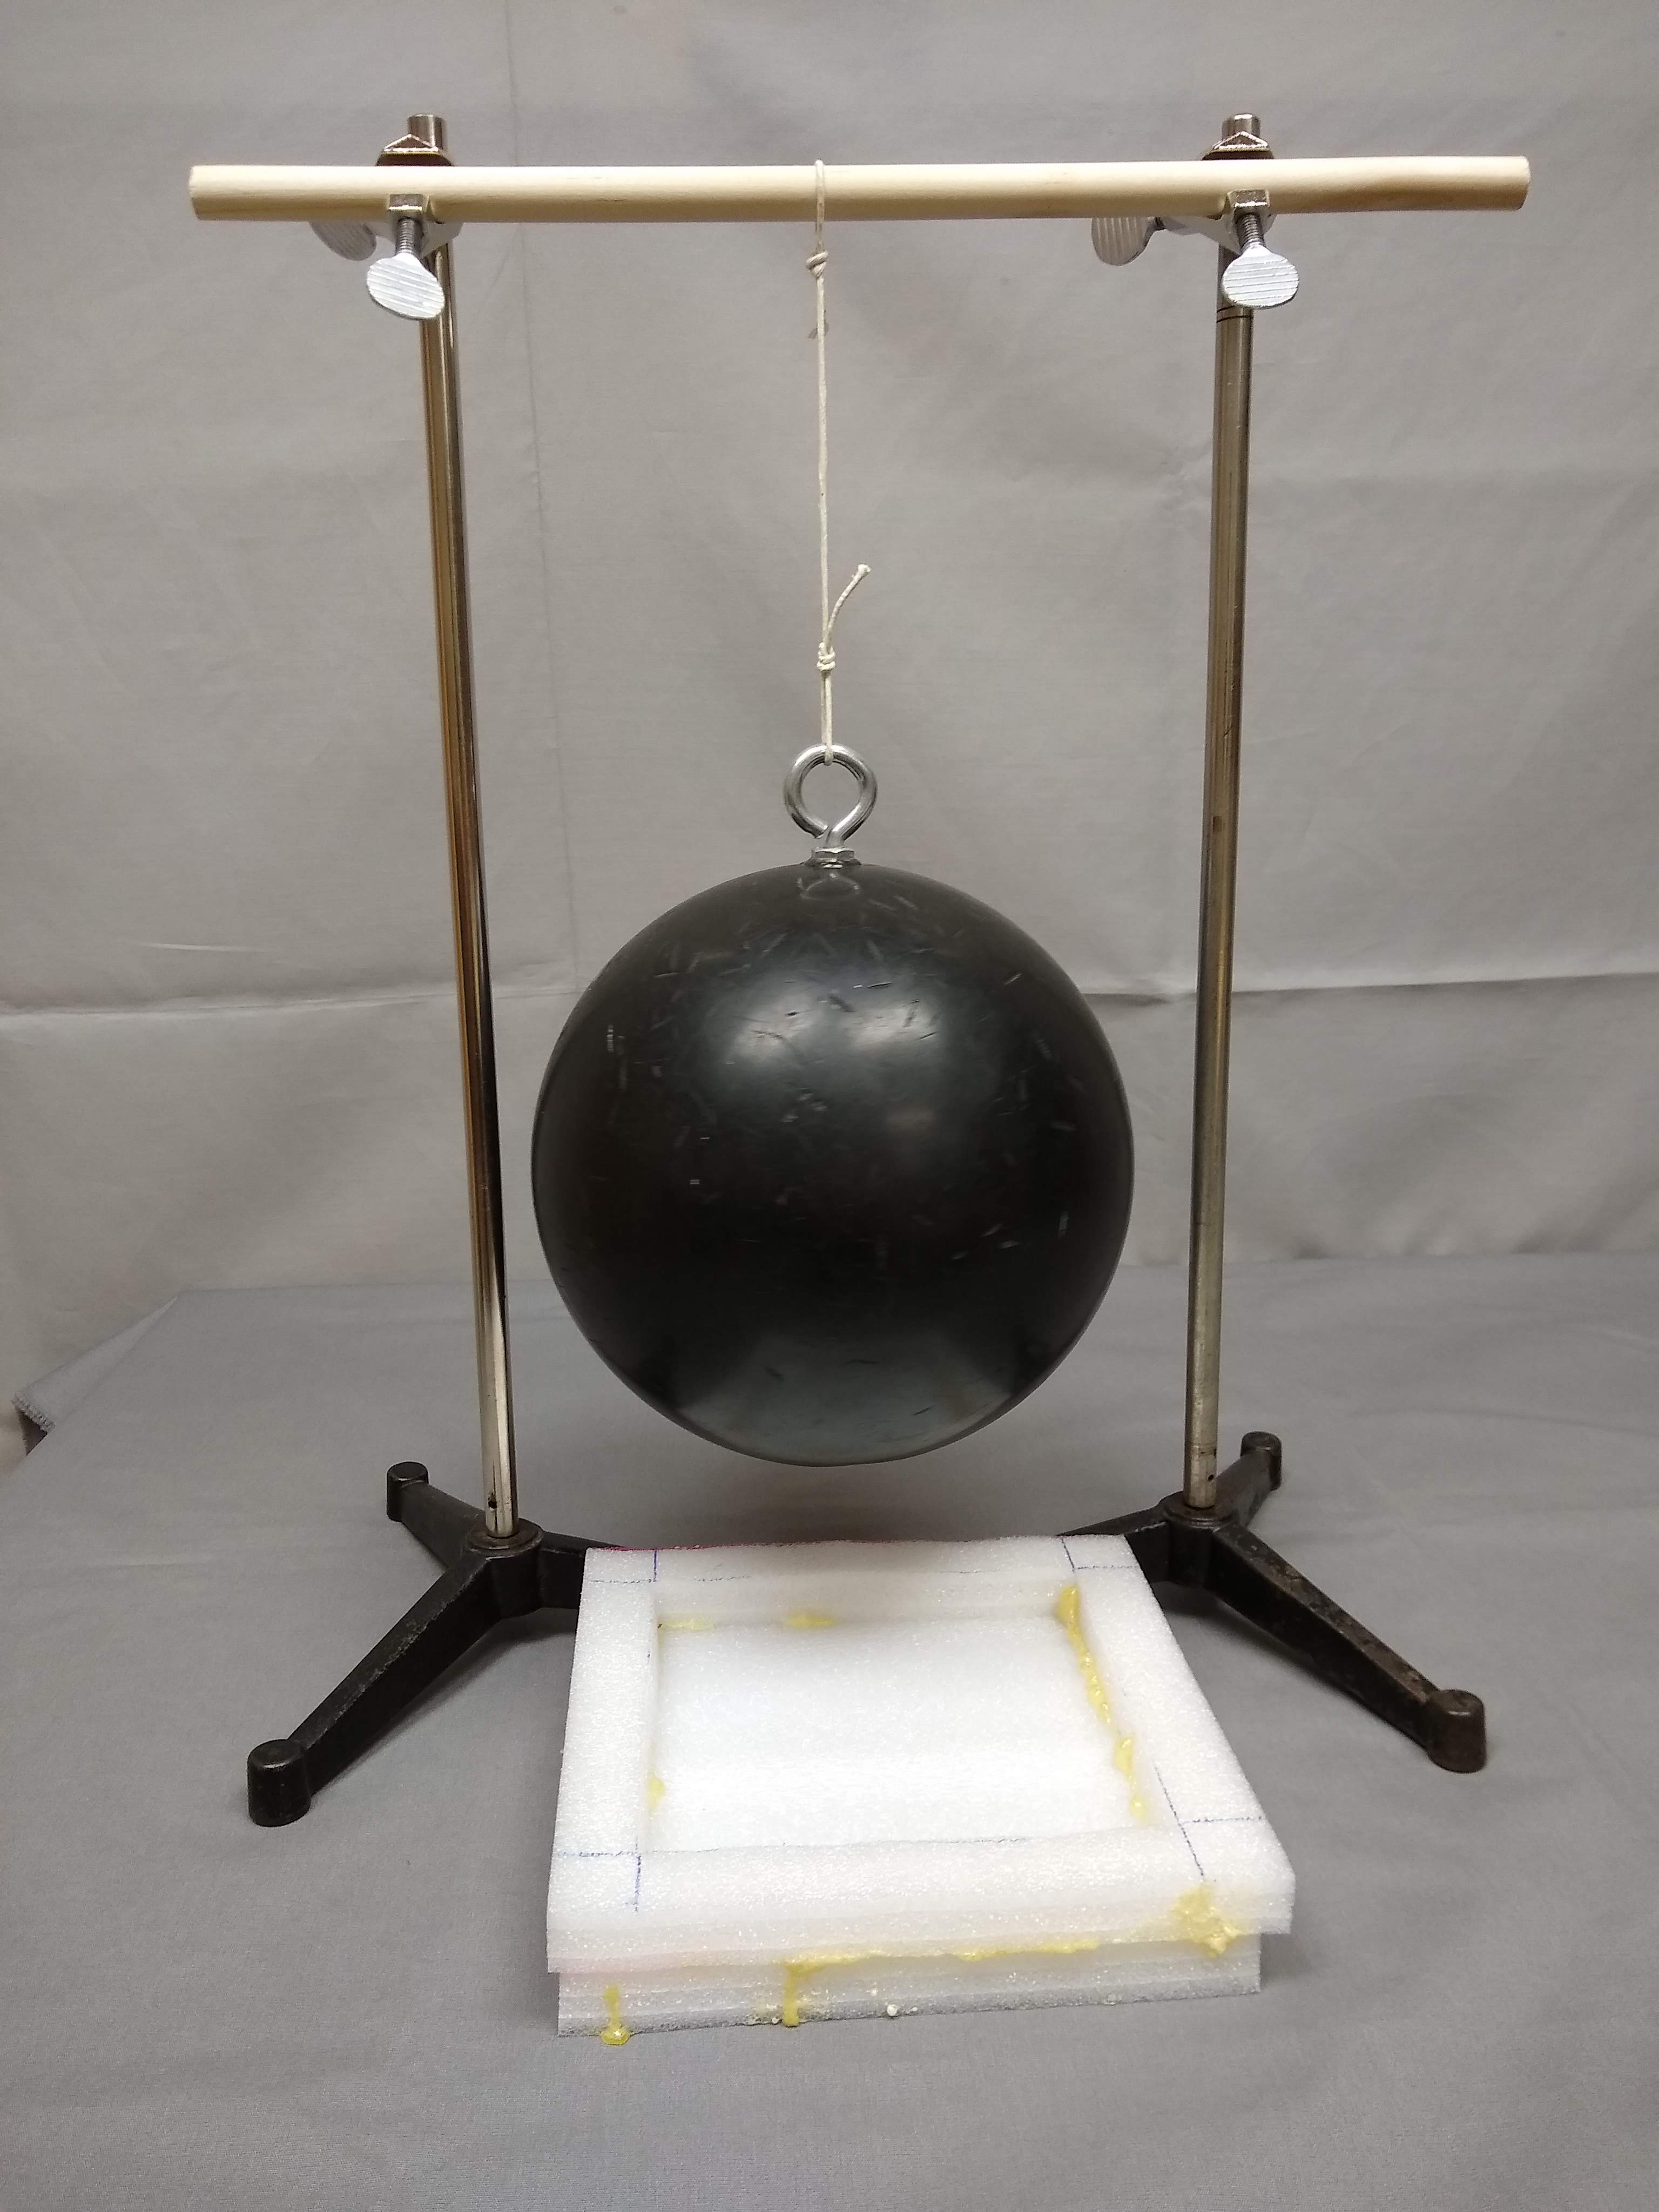 Bowling ball held suspended by string